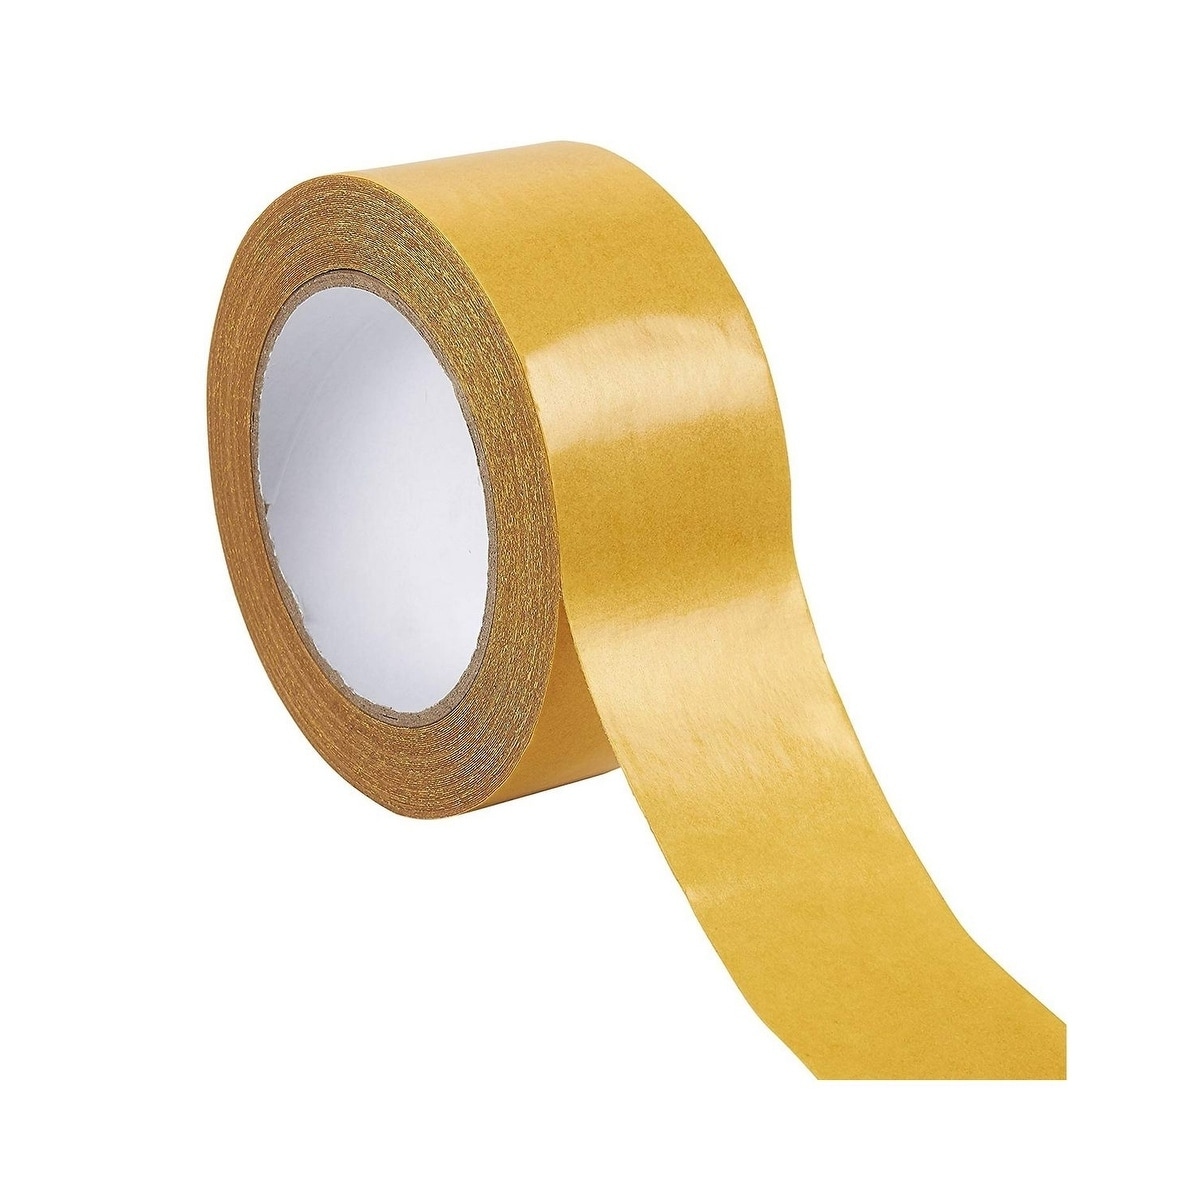 https://ak1.ostkcdn.com/images/products/28753558/Heavy-Duty-Double-Sided-Tape-for-Fabric-Anti-Skid-Carpet-Tape-for-Area-Rugs-4219f86c-2edb-4b5f-b491-ab4d40d304e8.jpg